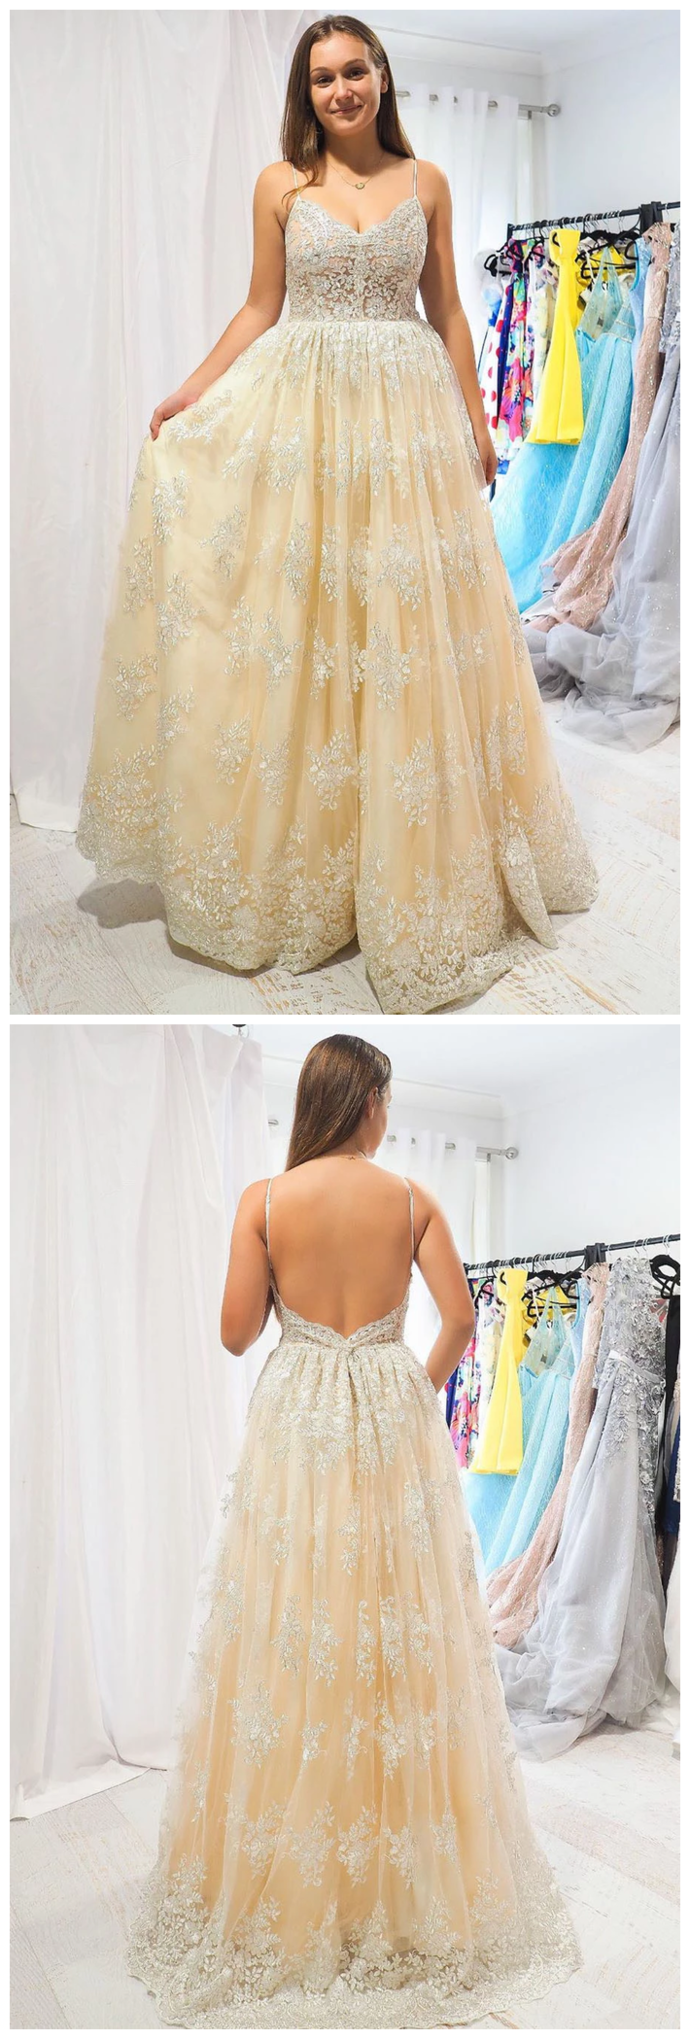 Elegant A-Line Straps Champagne Long Lace Prom Dress with Open Back   cg9291